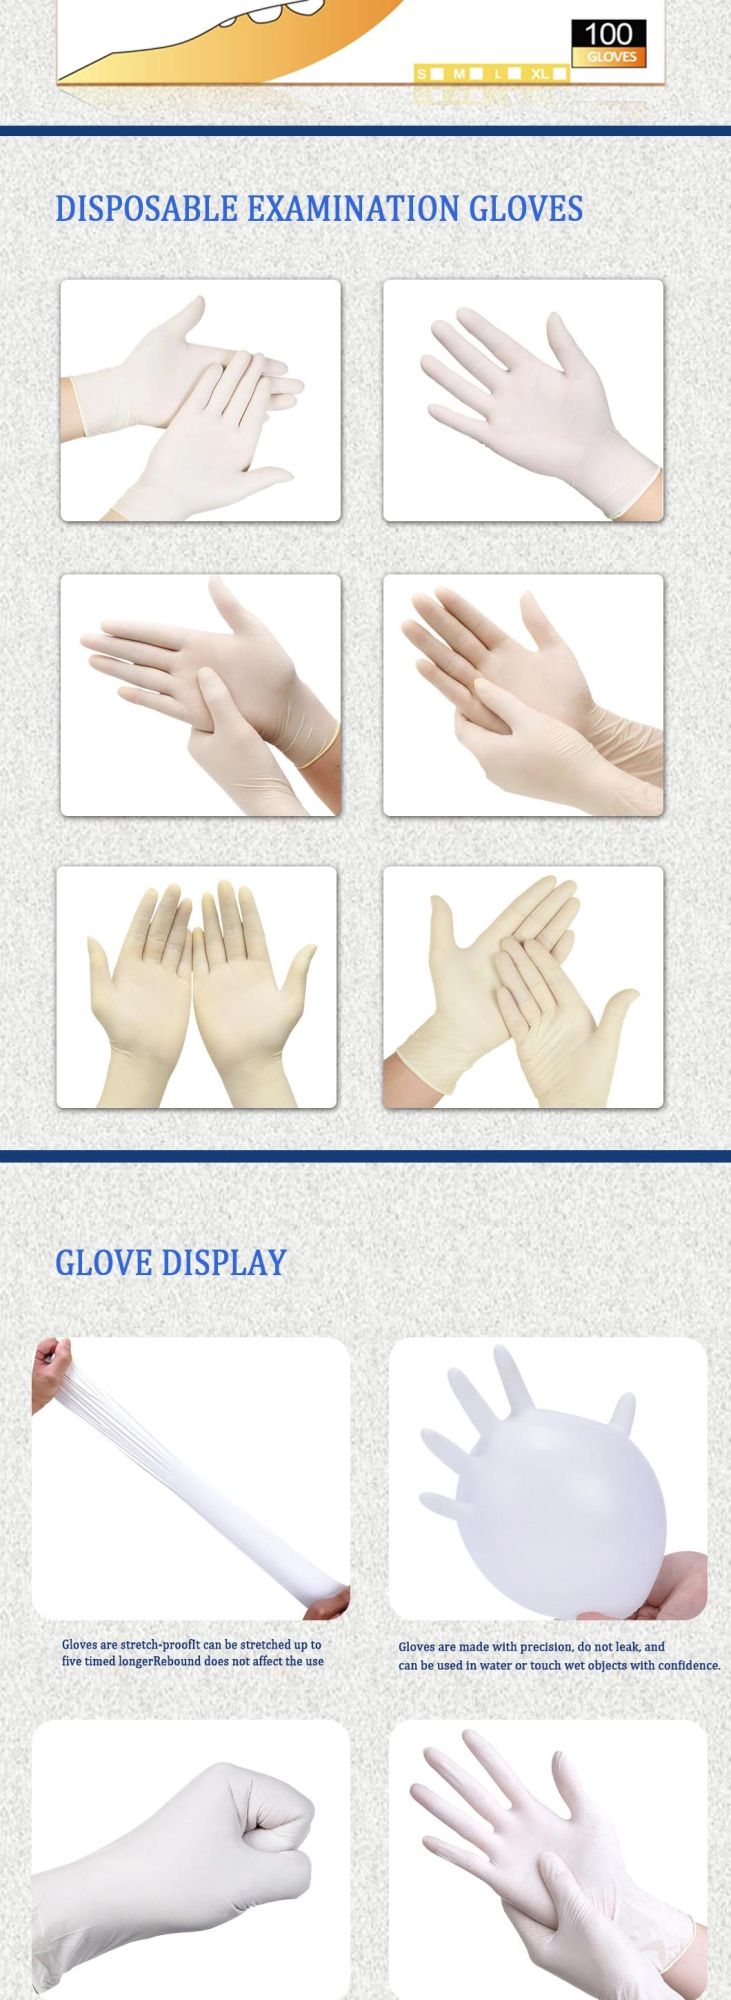 High Quality with Certification Yellow Color Latex Protective Disposable Medical Examation Nitrile Large Gloves